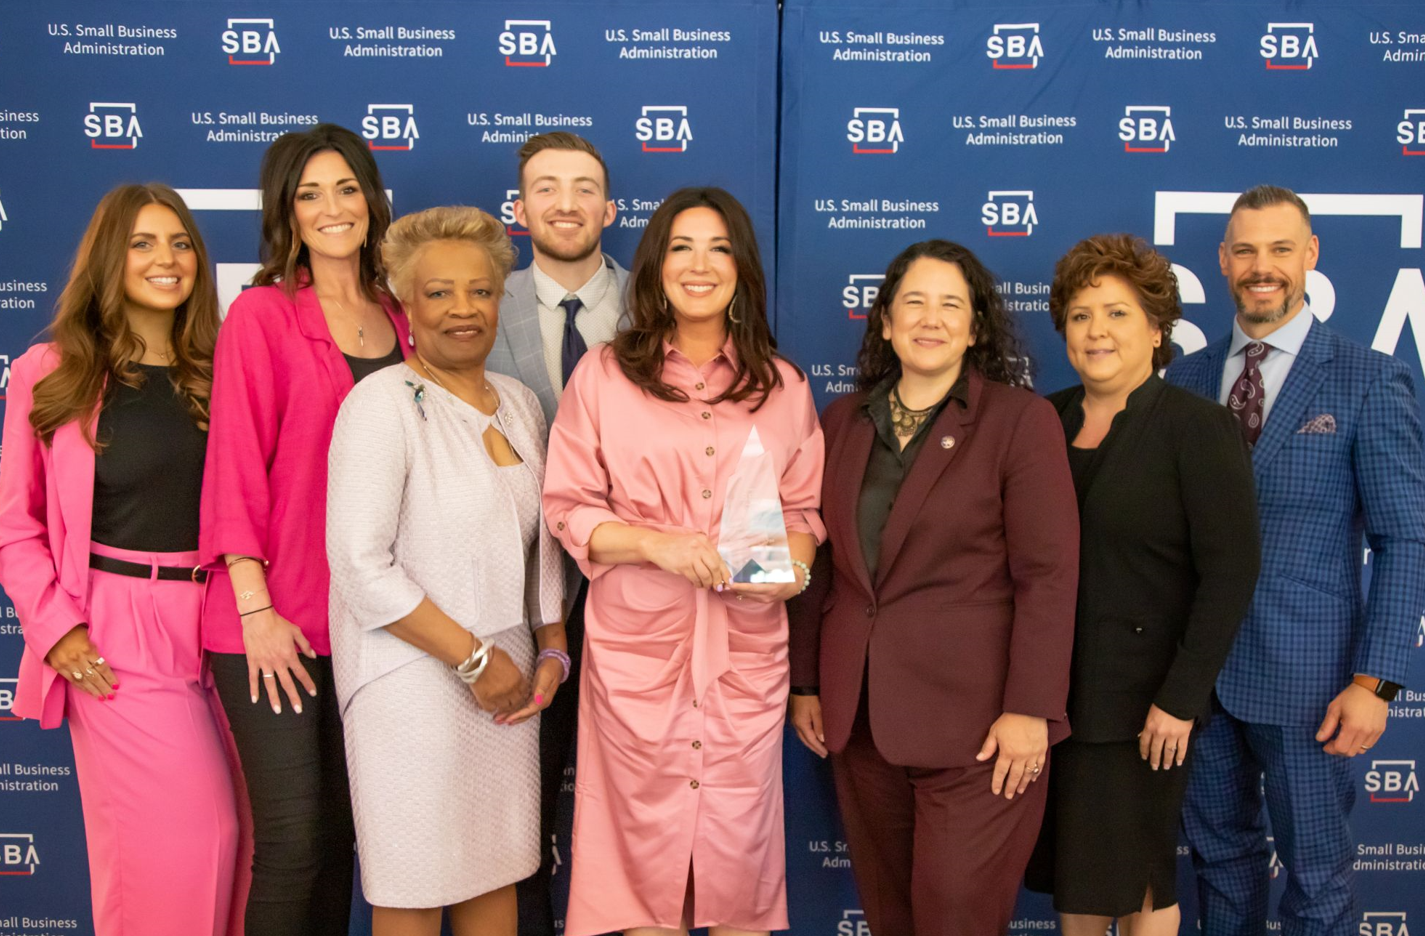 Group of people posing for a picture holding an award at the U.S. Small Business Administration event.